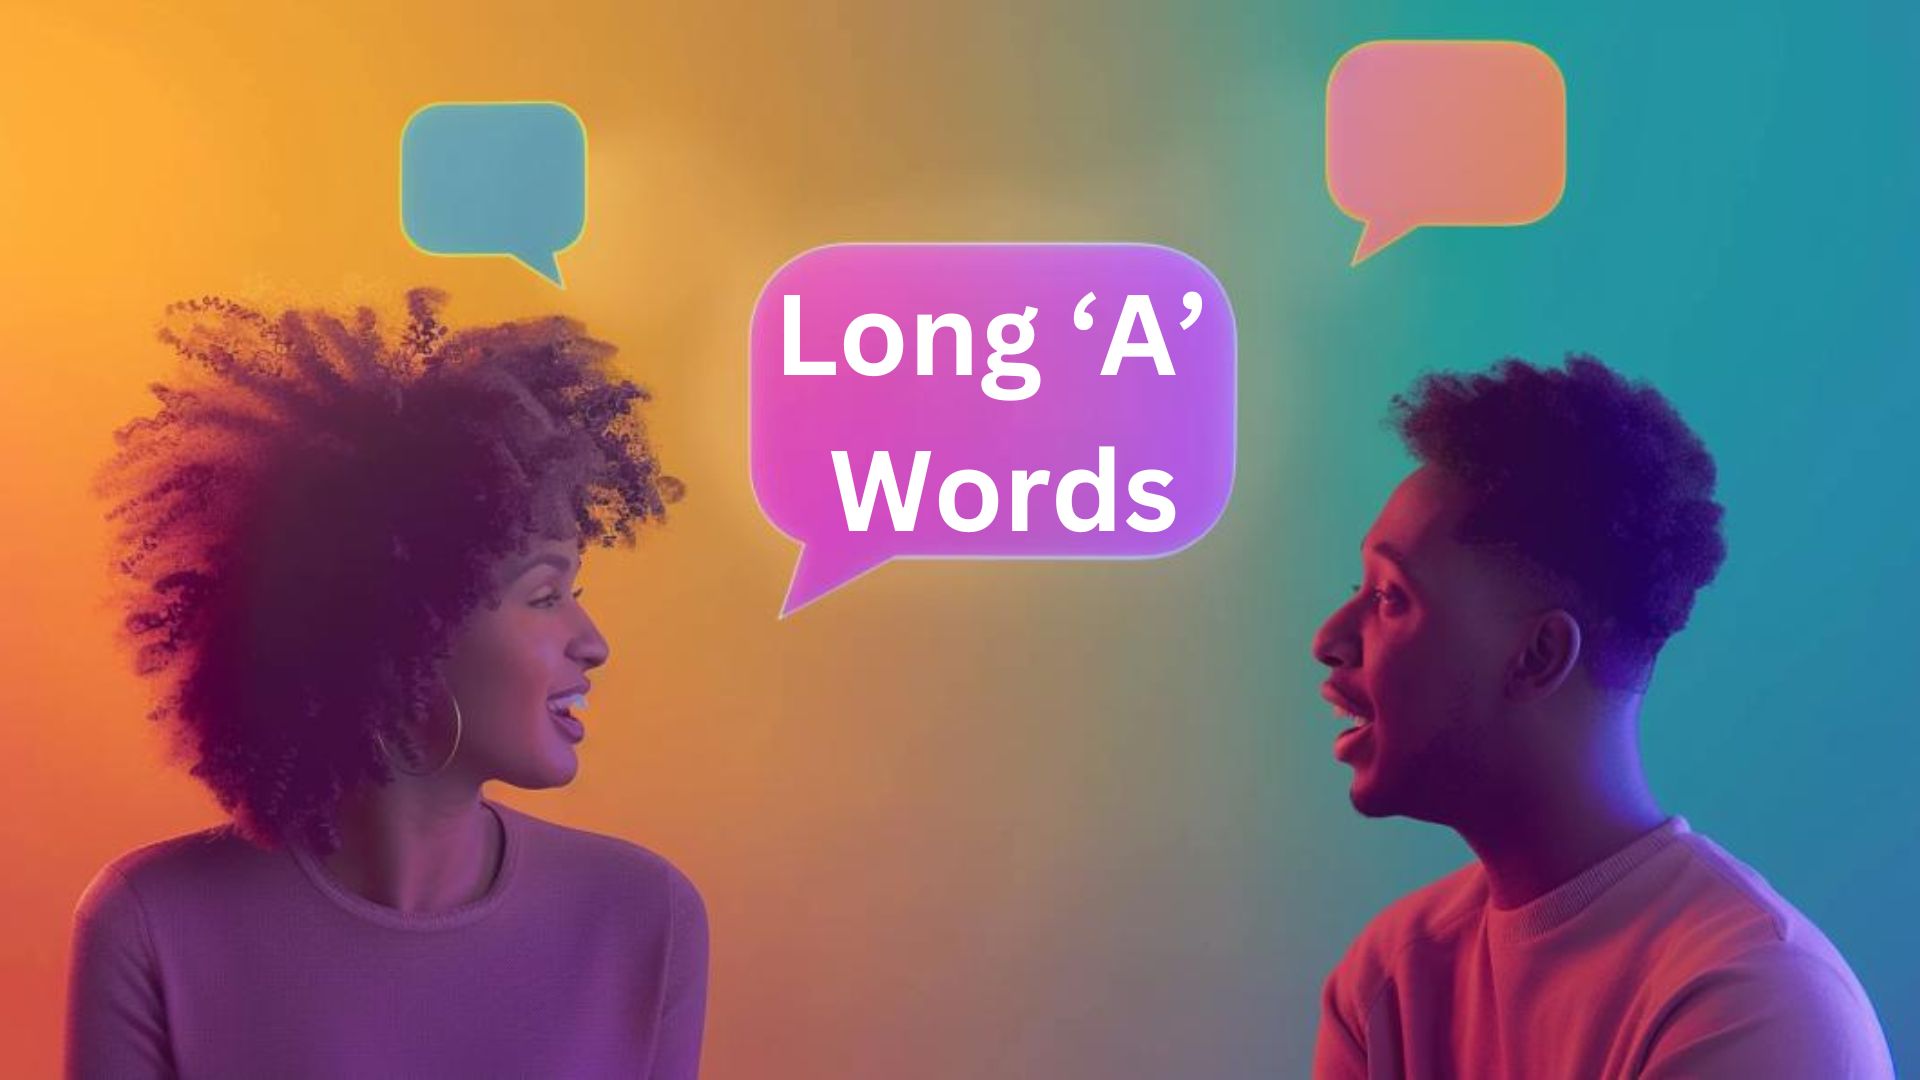 How Do Long 'A' Words Influence Language and Communication?